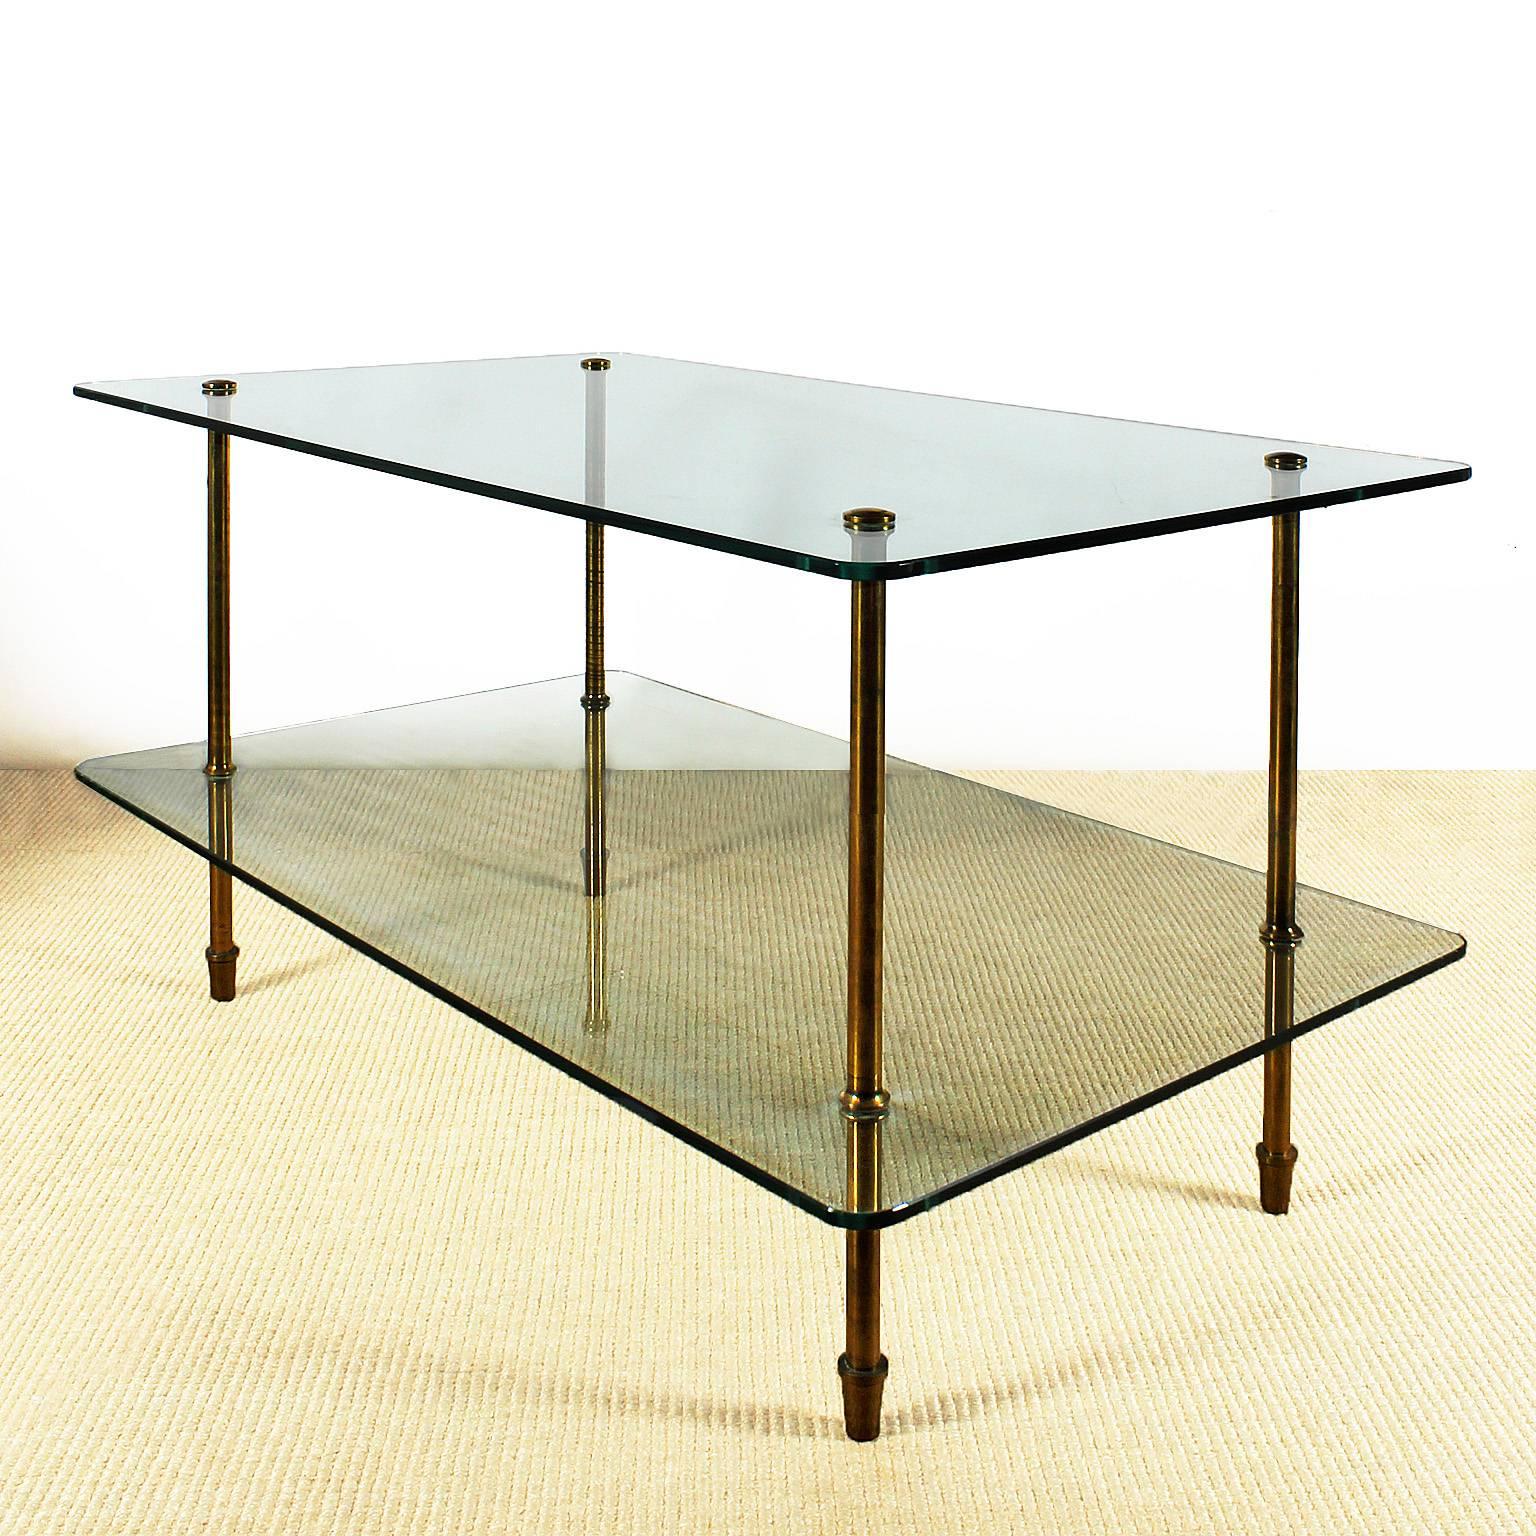 Side table with two thick glass levels, polished solid brass legs, can be completely dismantled. (Possibility of changing the glass measurements),

Italy, circa 1960.